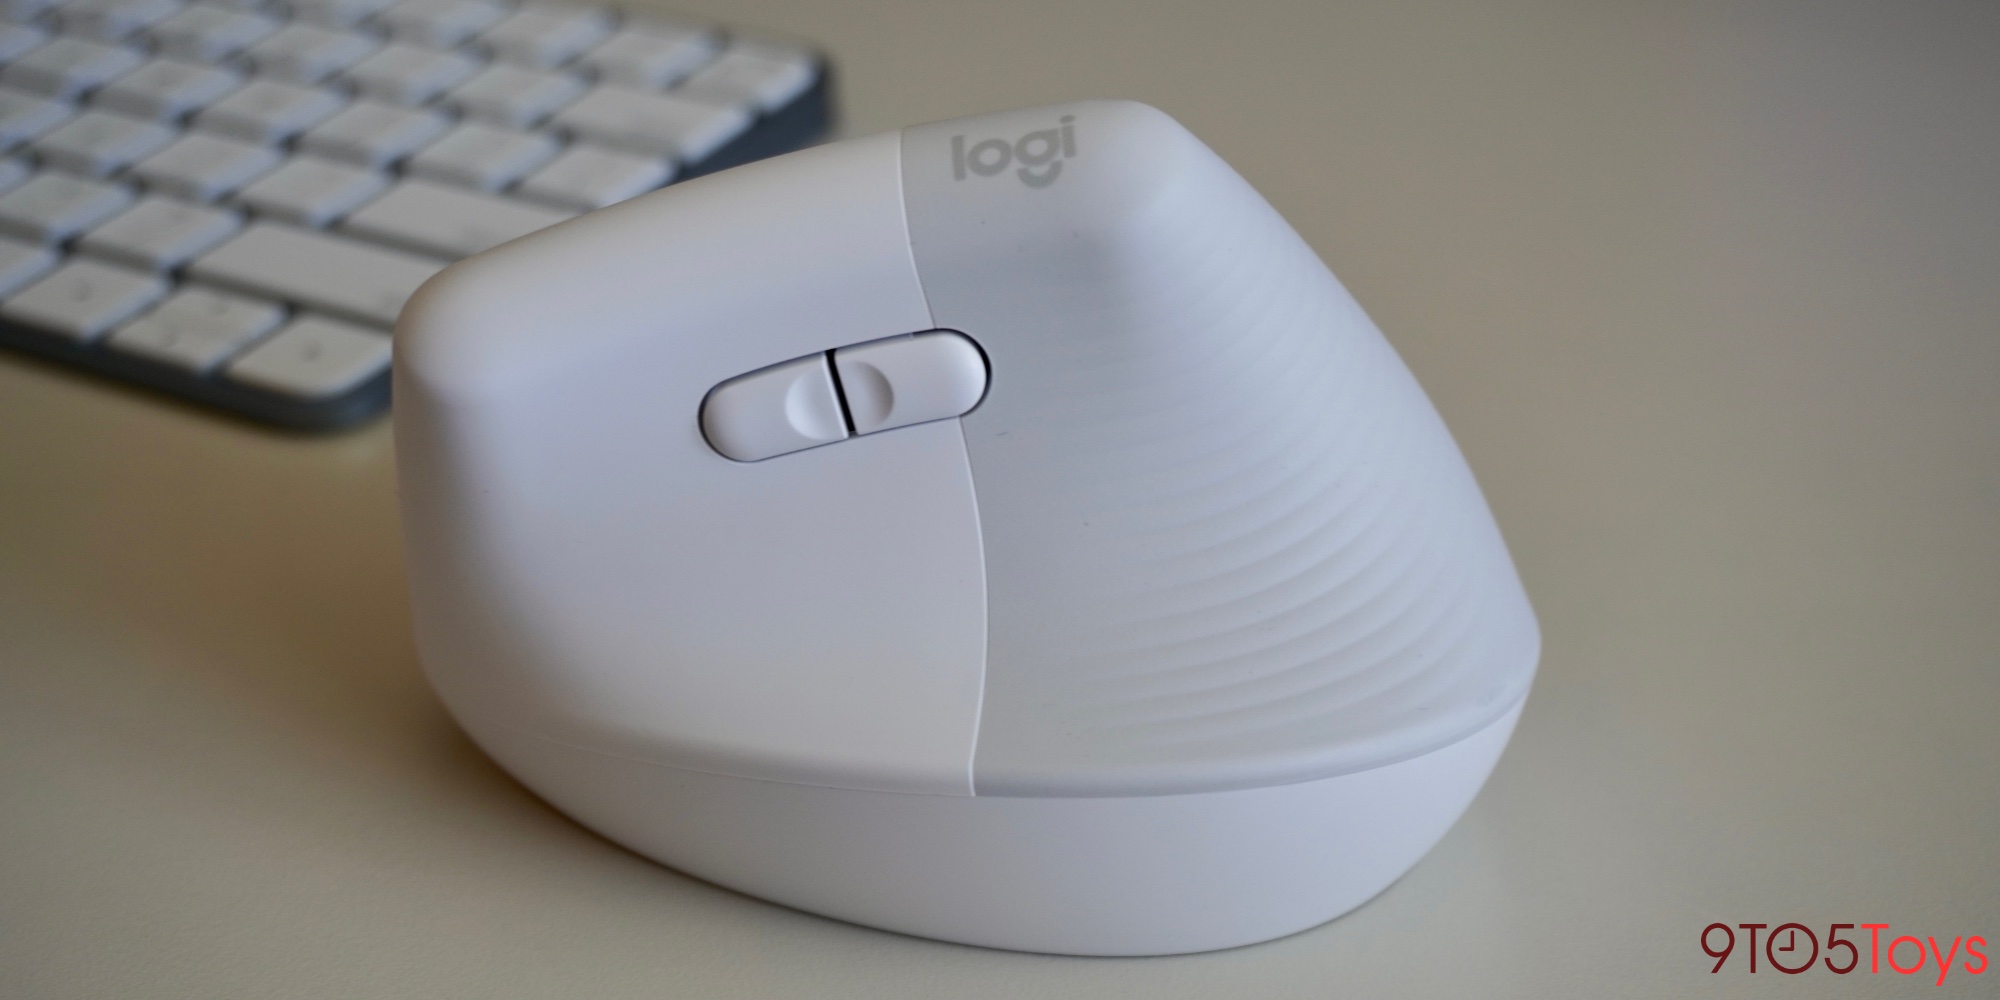 Logitech Lift review: All the right compromises - 9to5Toys